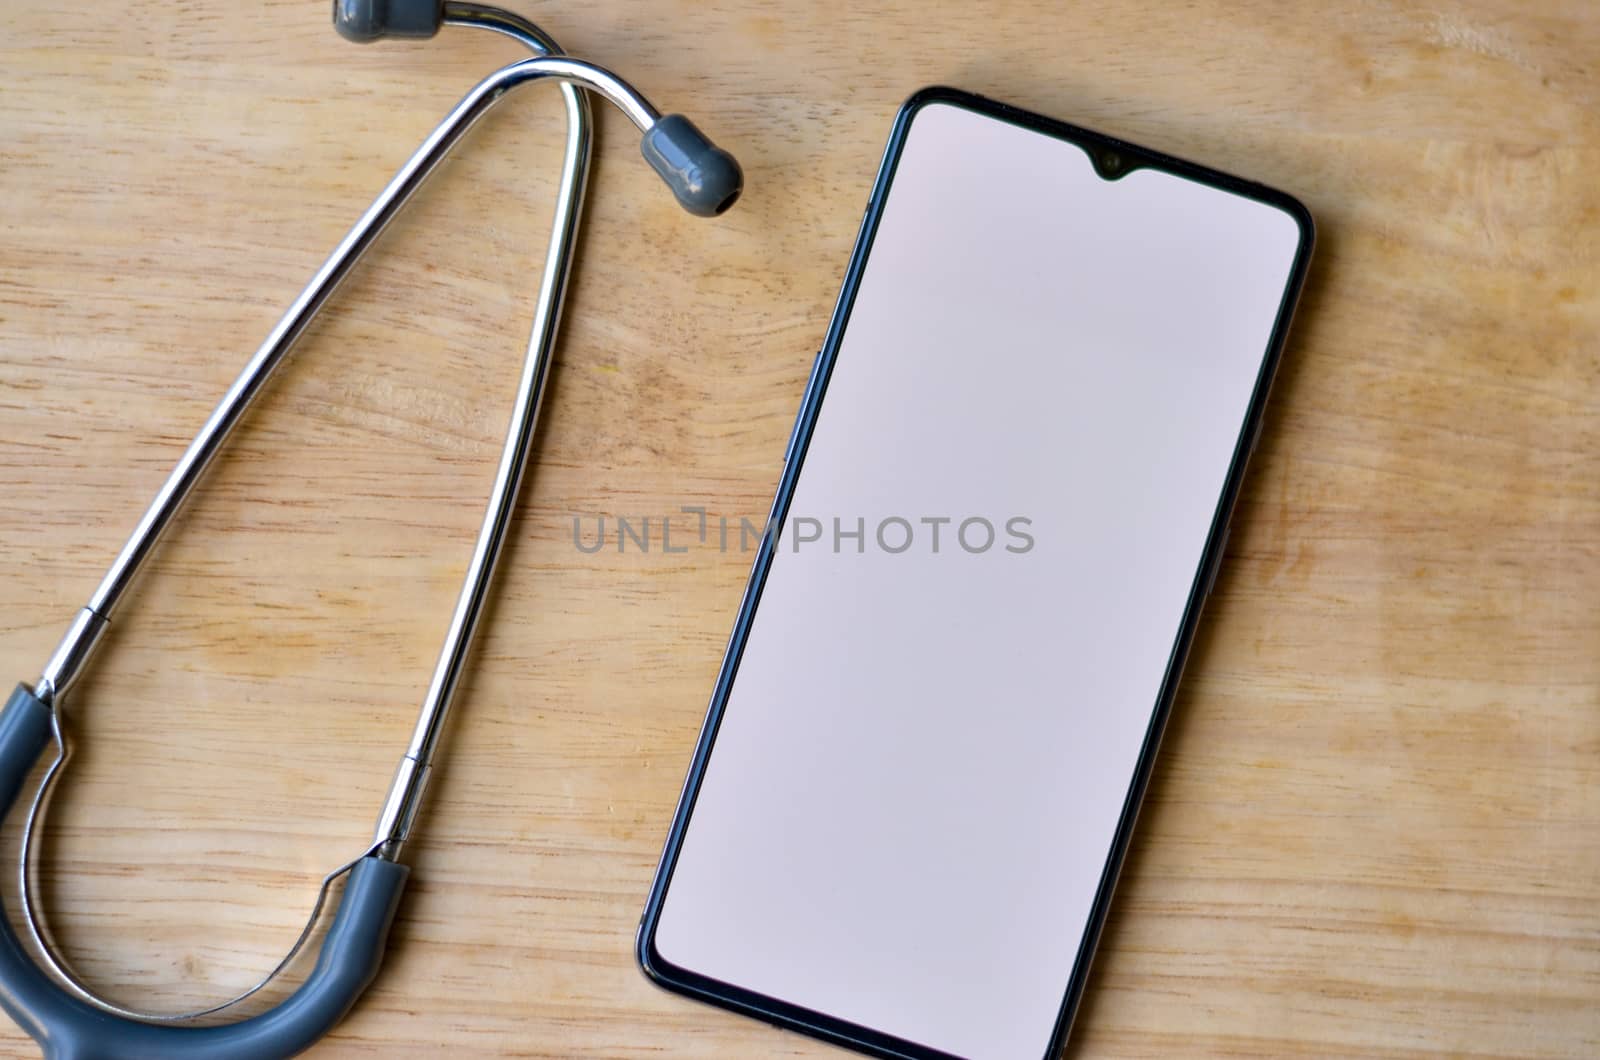 Stethoscope and a mobile phone showing empty white screen kept over a wooden background. Advertising healthcare internet app or health tech software concept